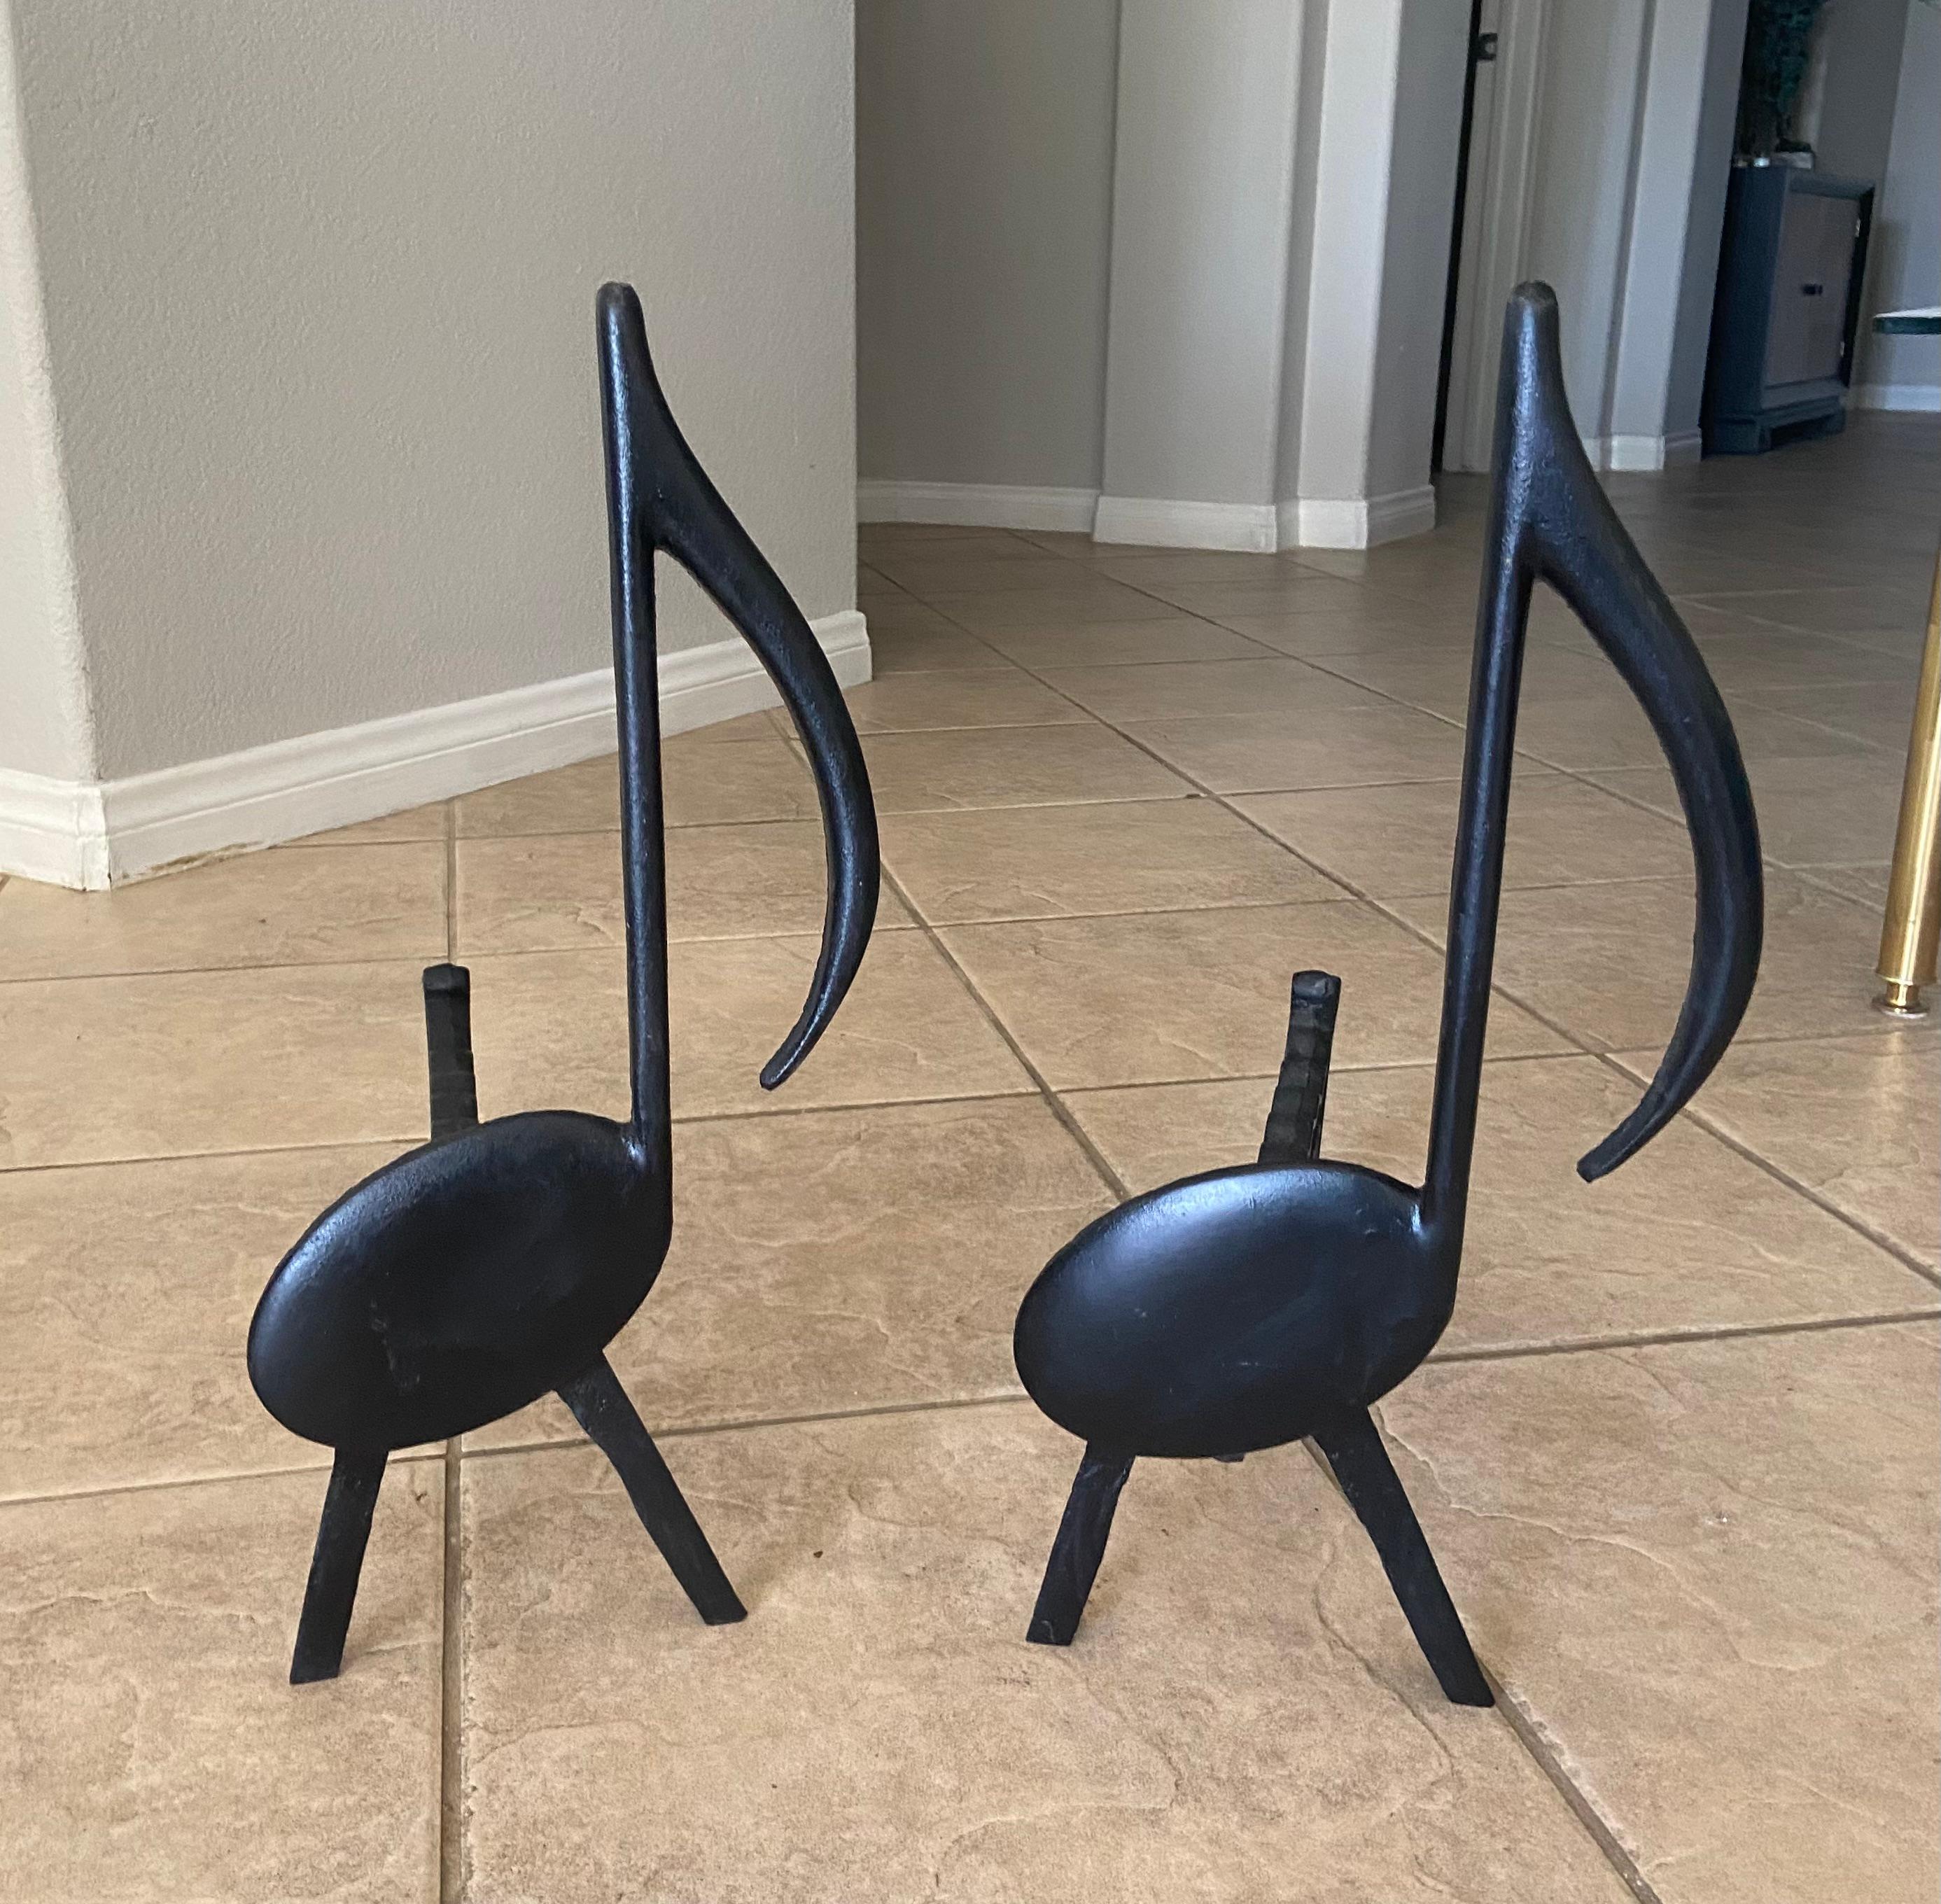 Pair of mid century black cast iron music note motif fireplace andirons by Tennessee Chrome Plate of Nashville.